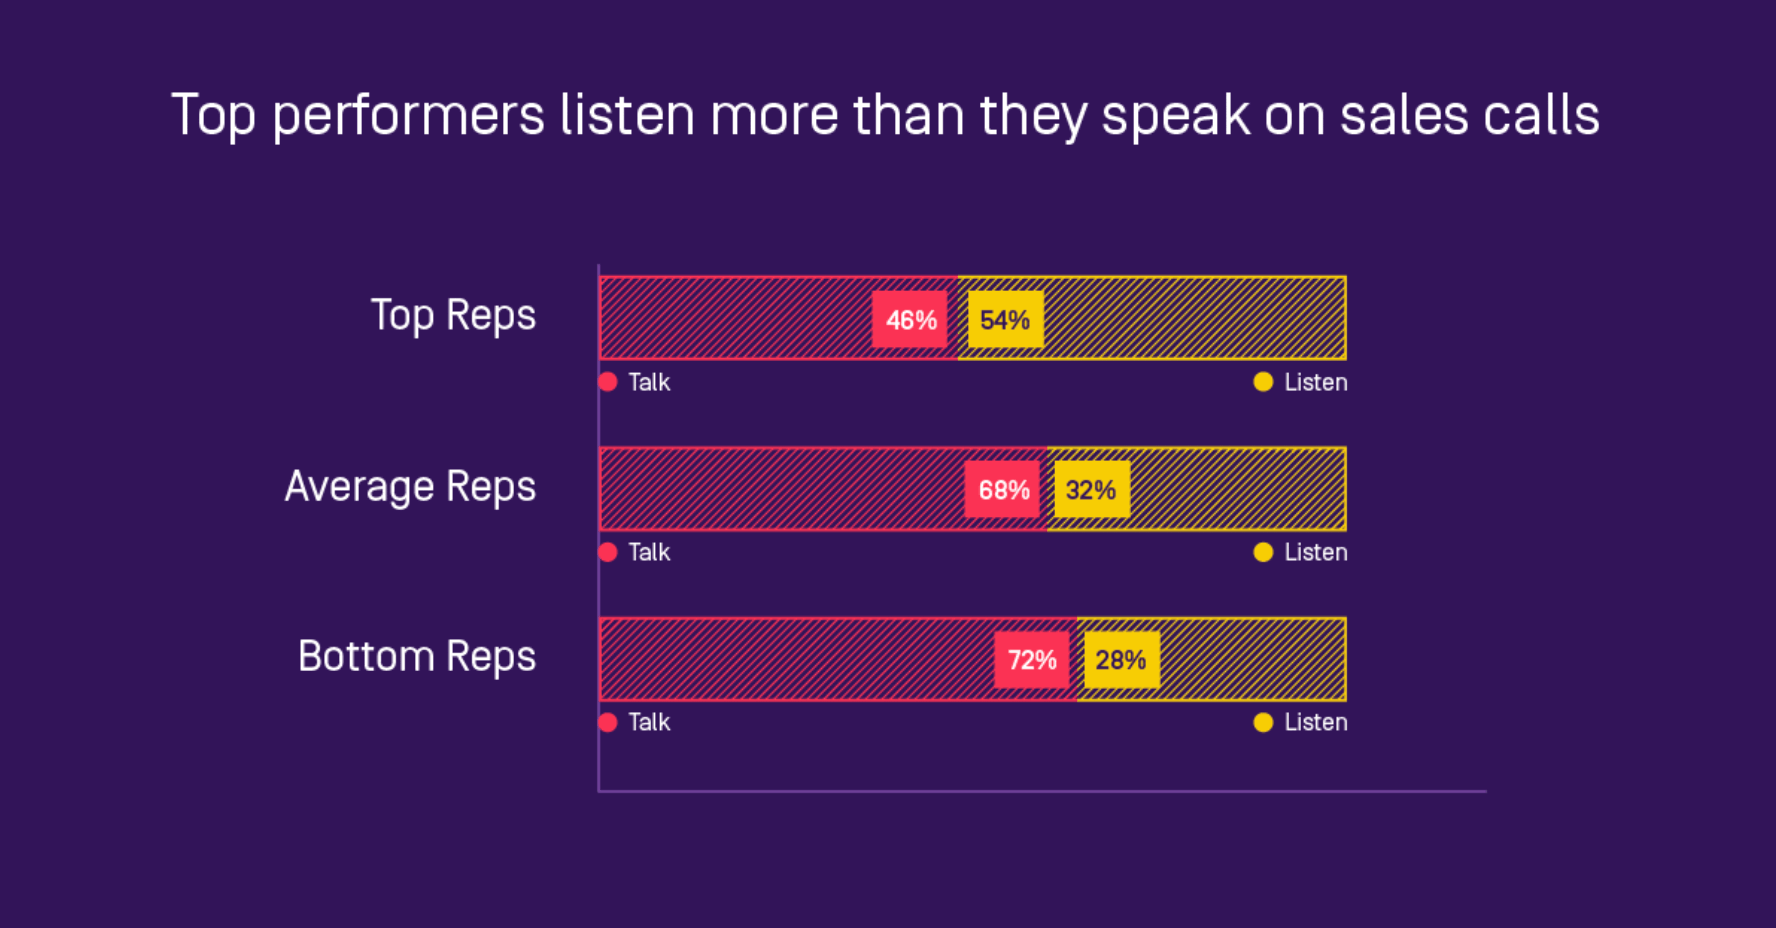 Talk to listen ratio for top sales performers